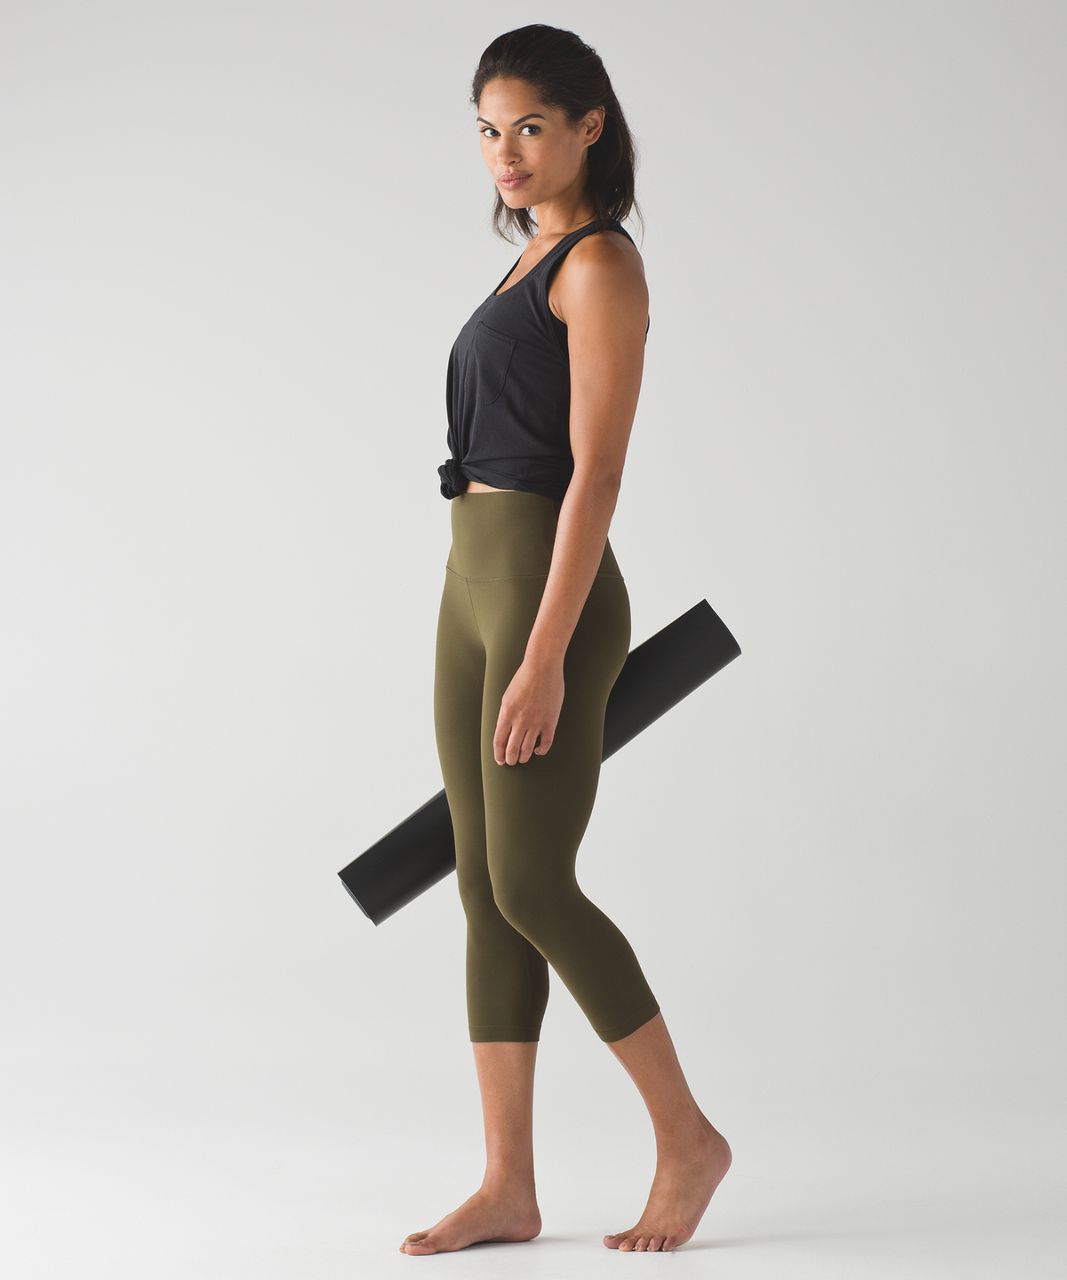 Lululemon Military and First Responders Discount